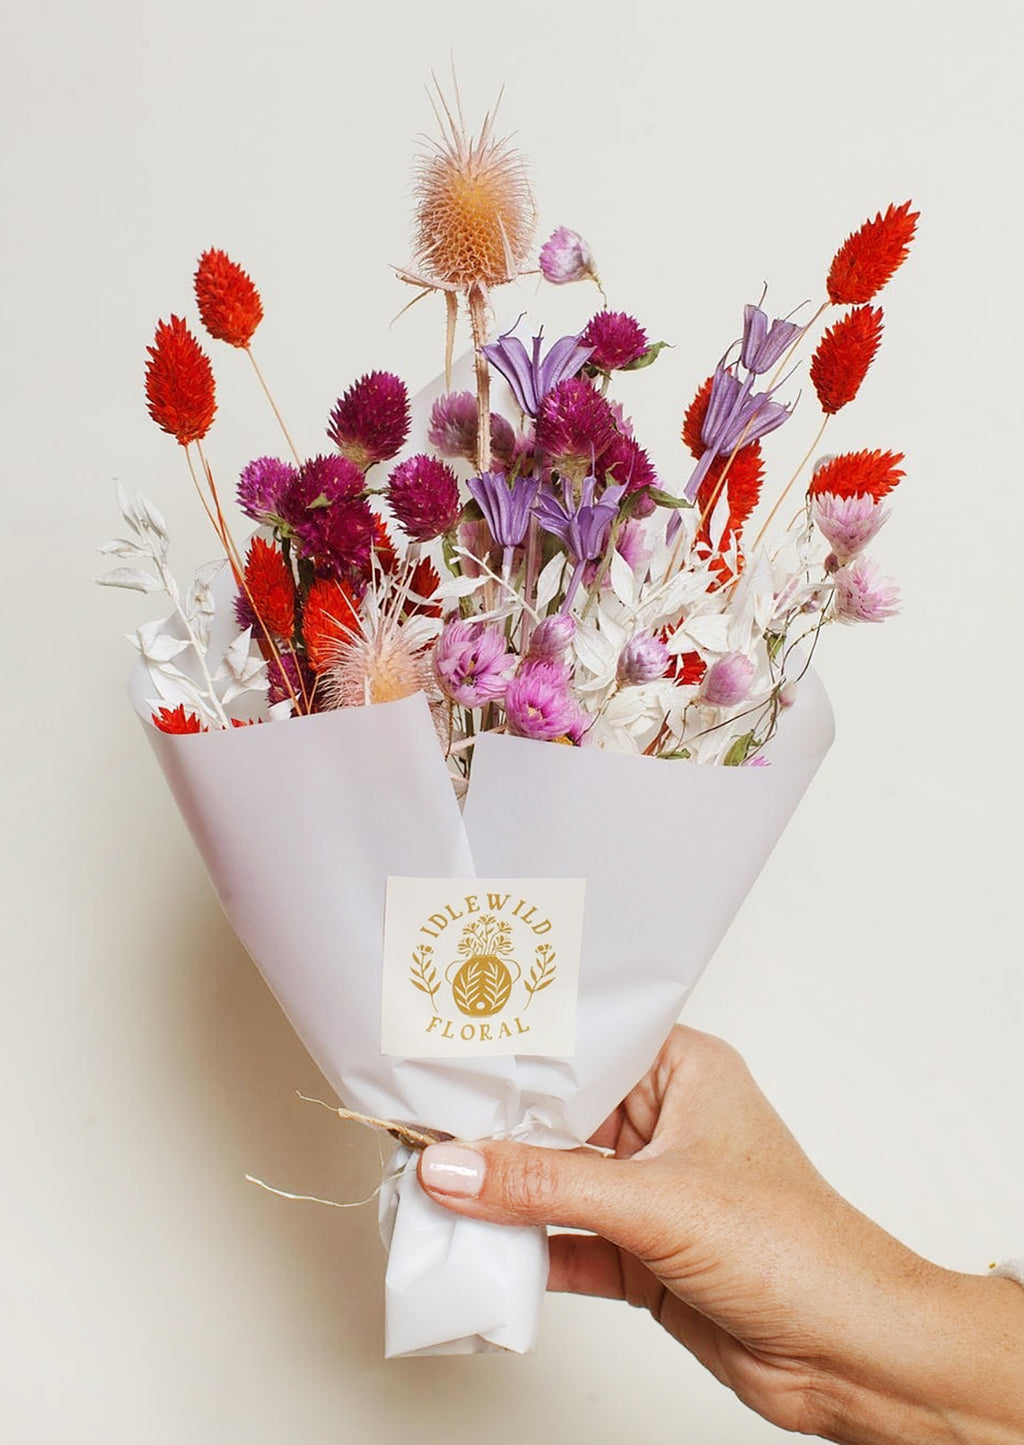 Candy Hearts Multi: A dried floral arrangement in red and purple.